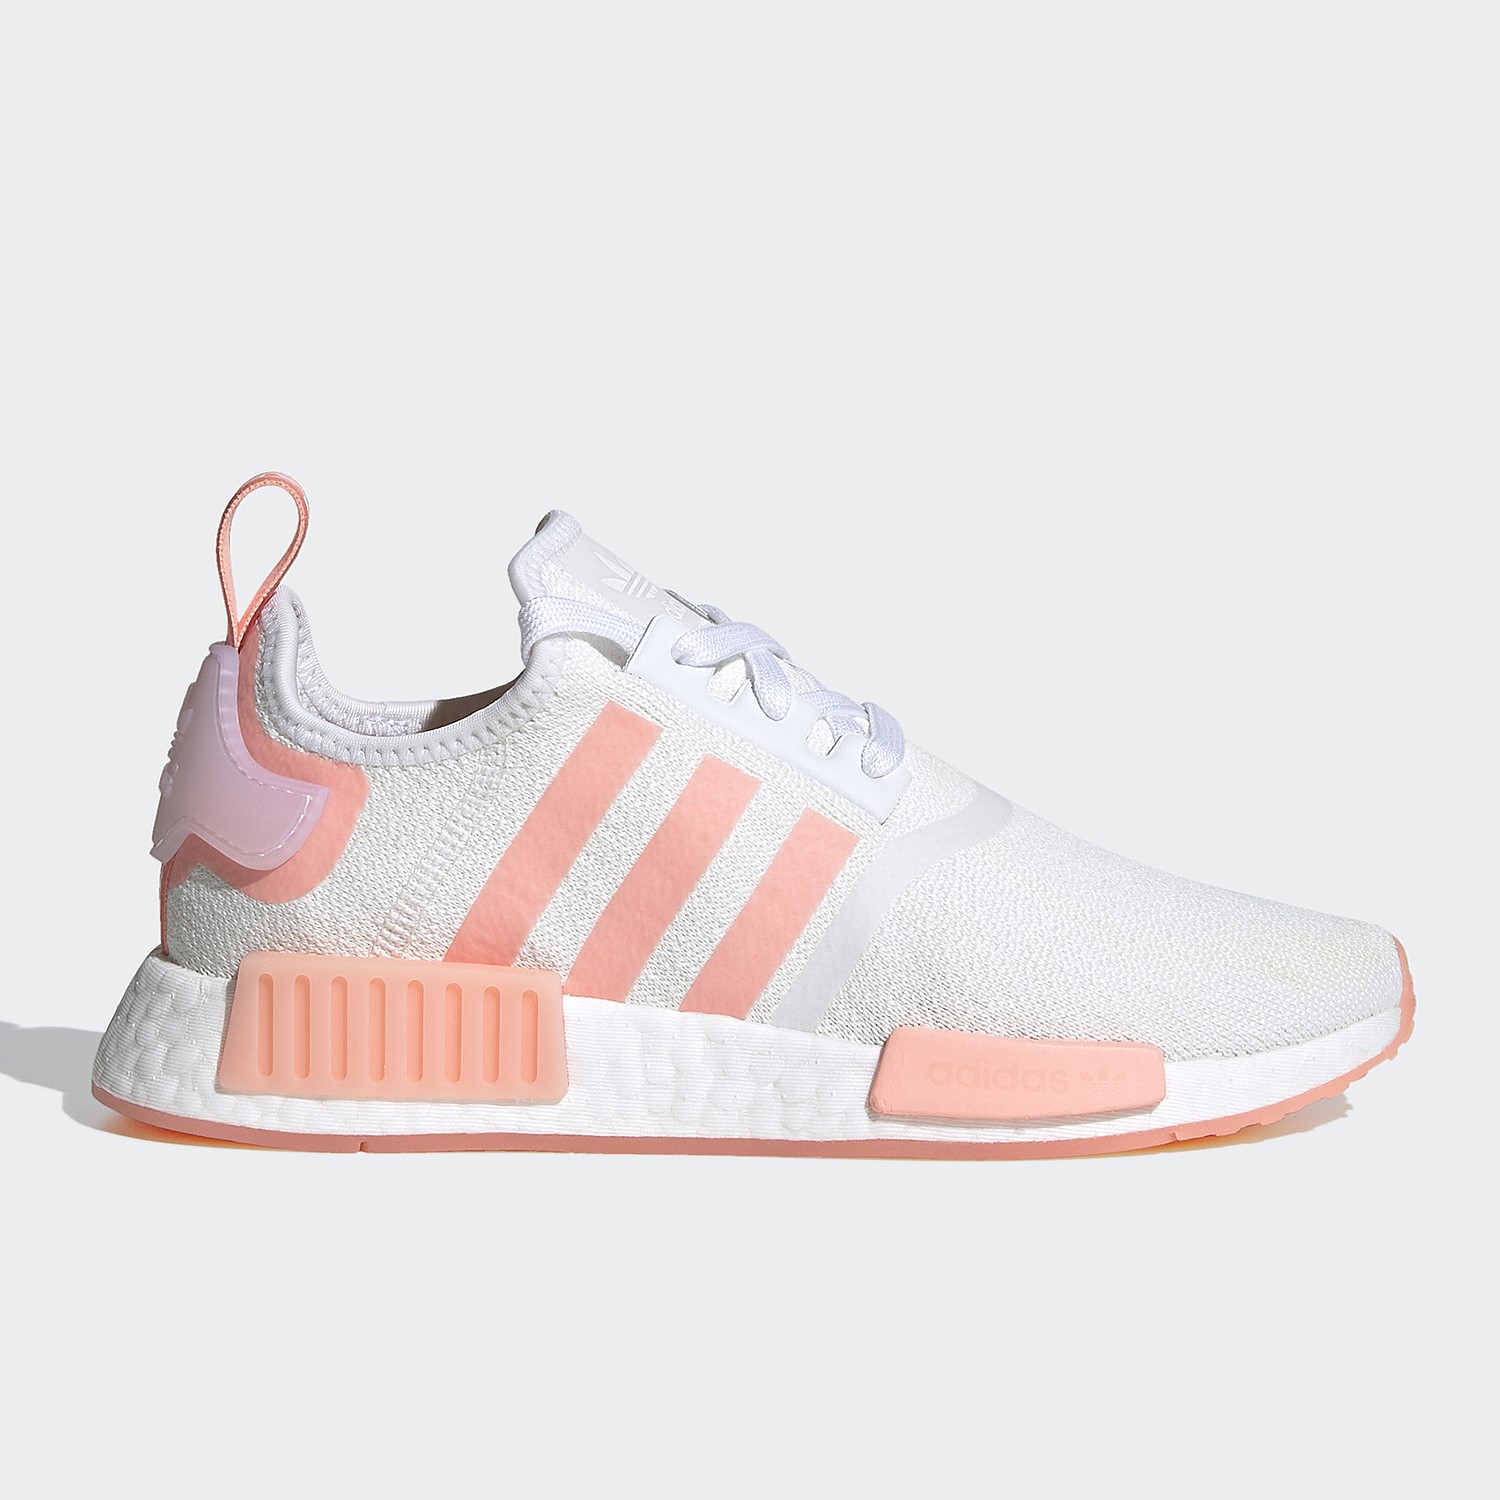 nmd_r1 shoes nz